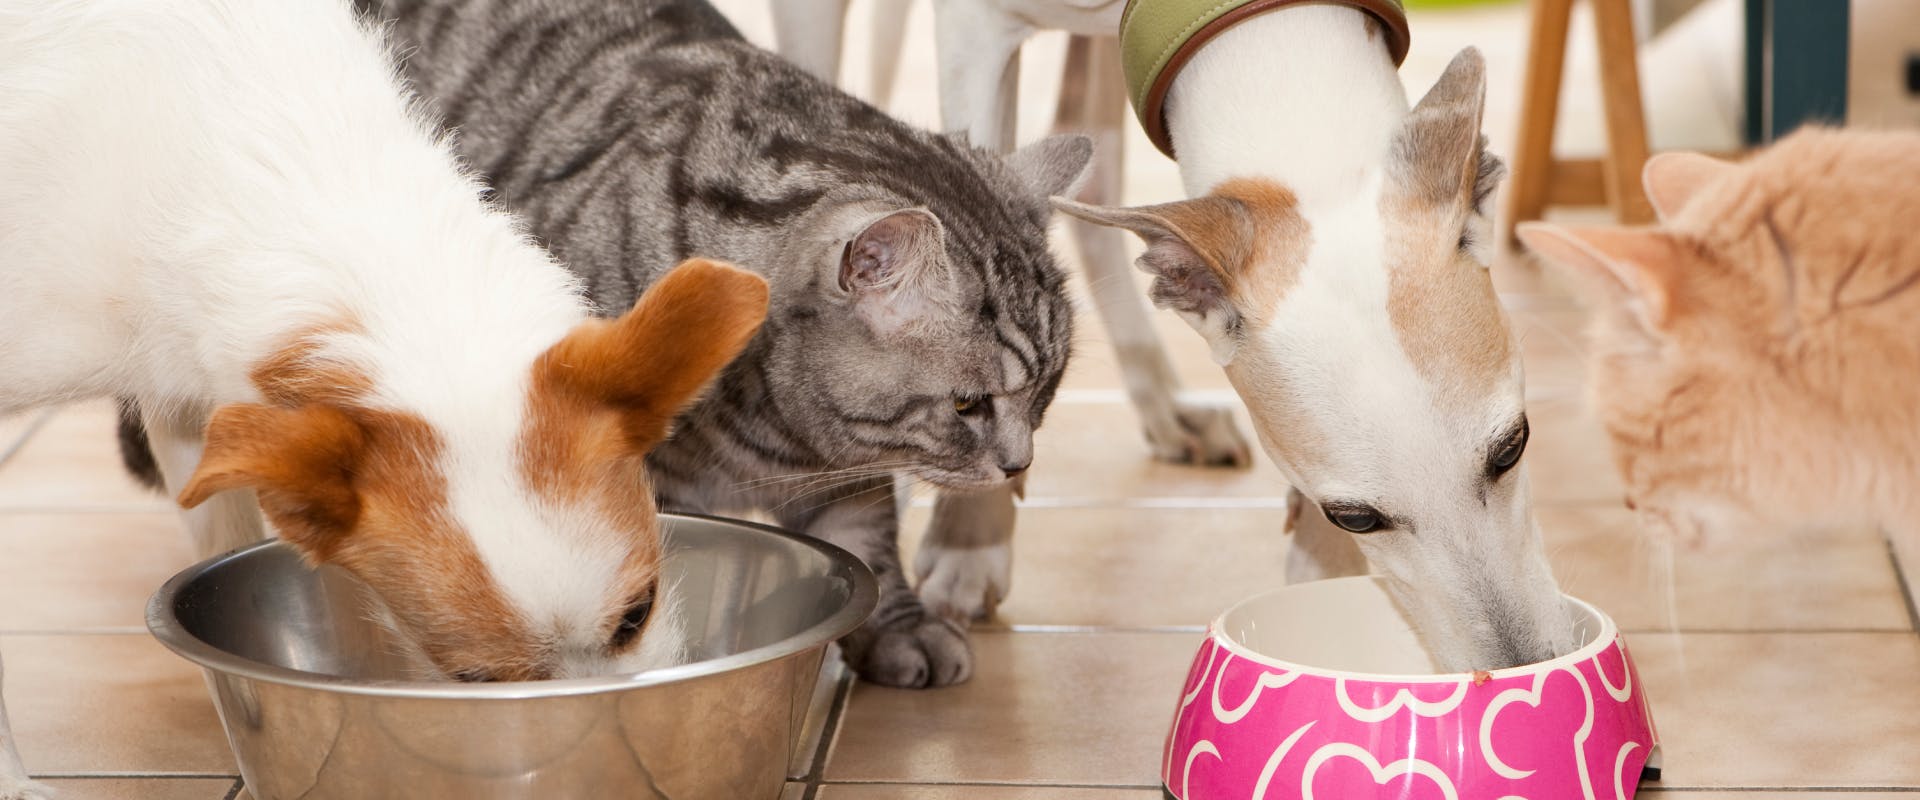 two dogs eating out of dog food bowls whilst being watched by two curious cats